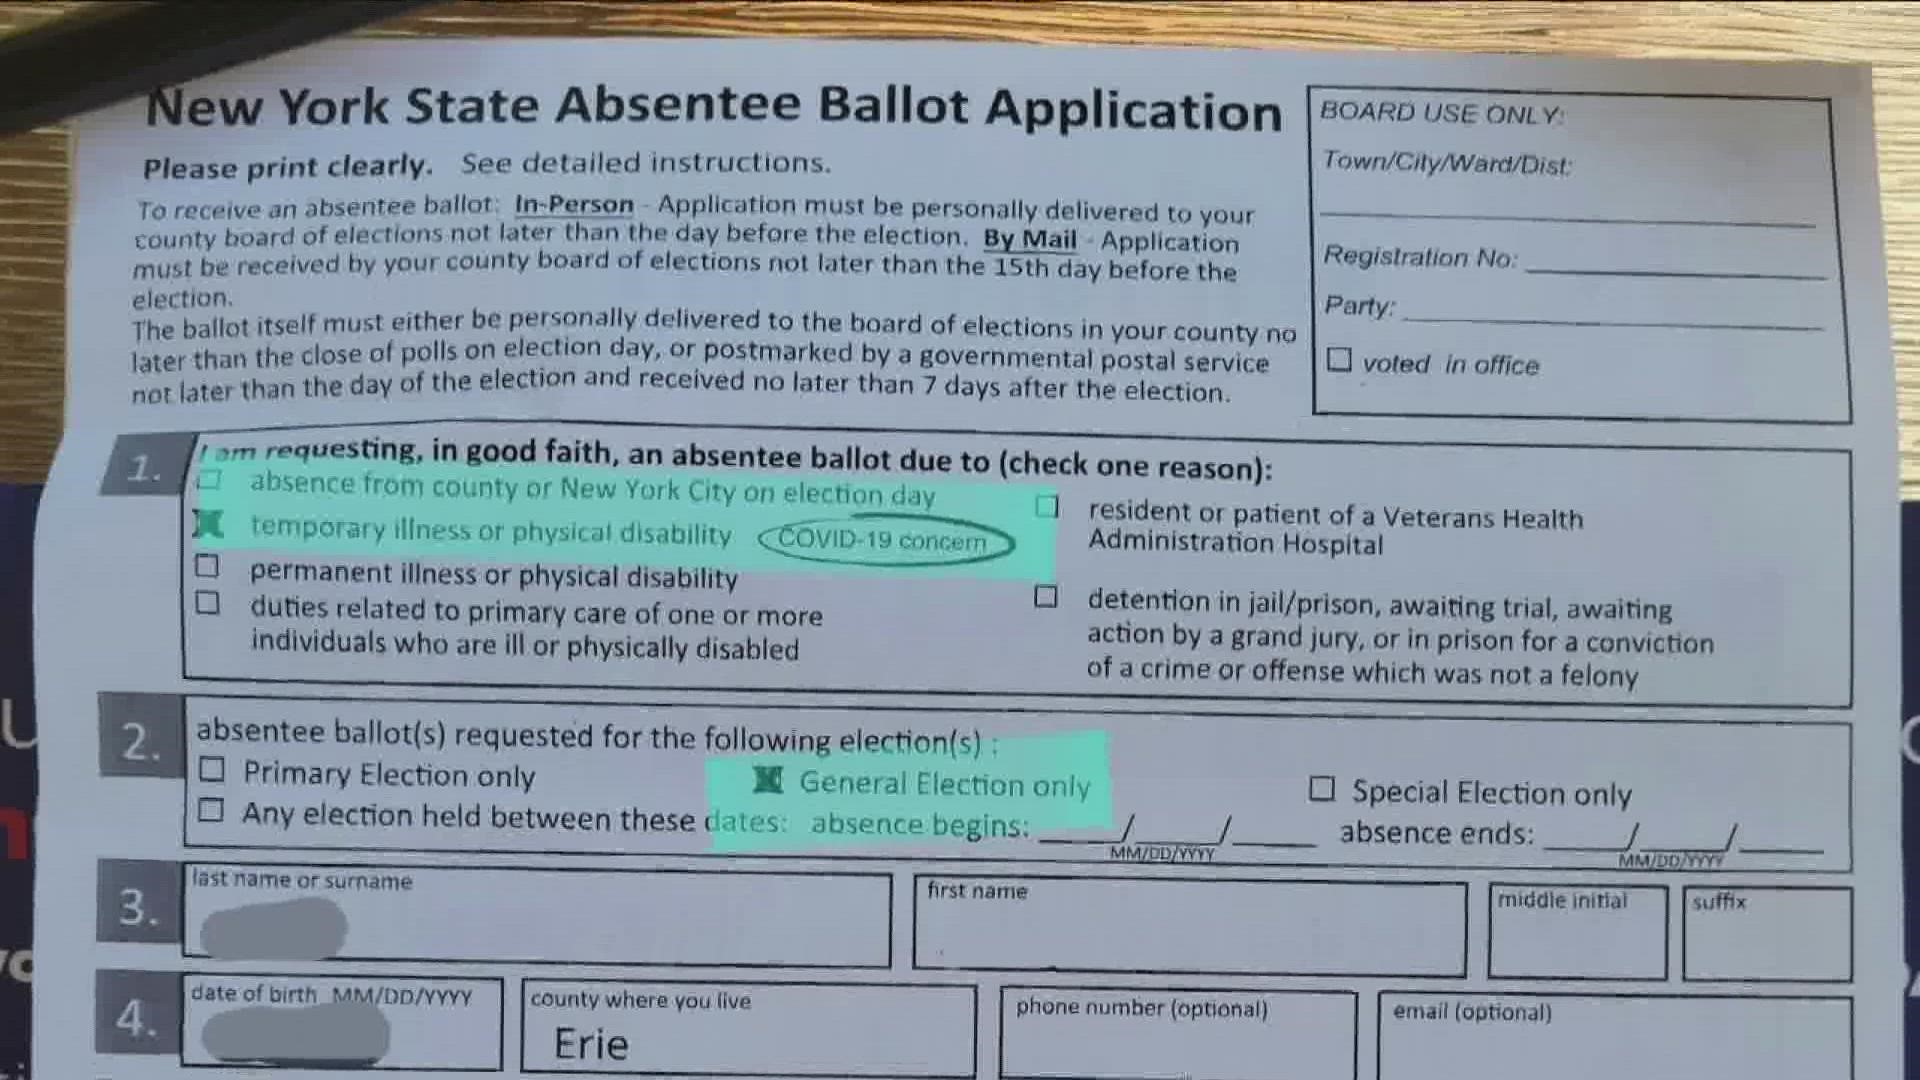 Applications for absentee ballots were sent to registered voters by the party itself, complete with prepaid postage to mail in.